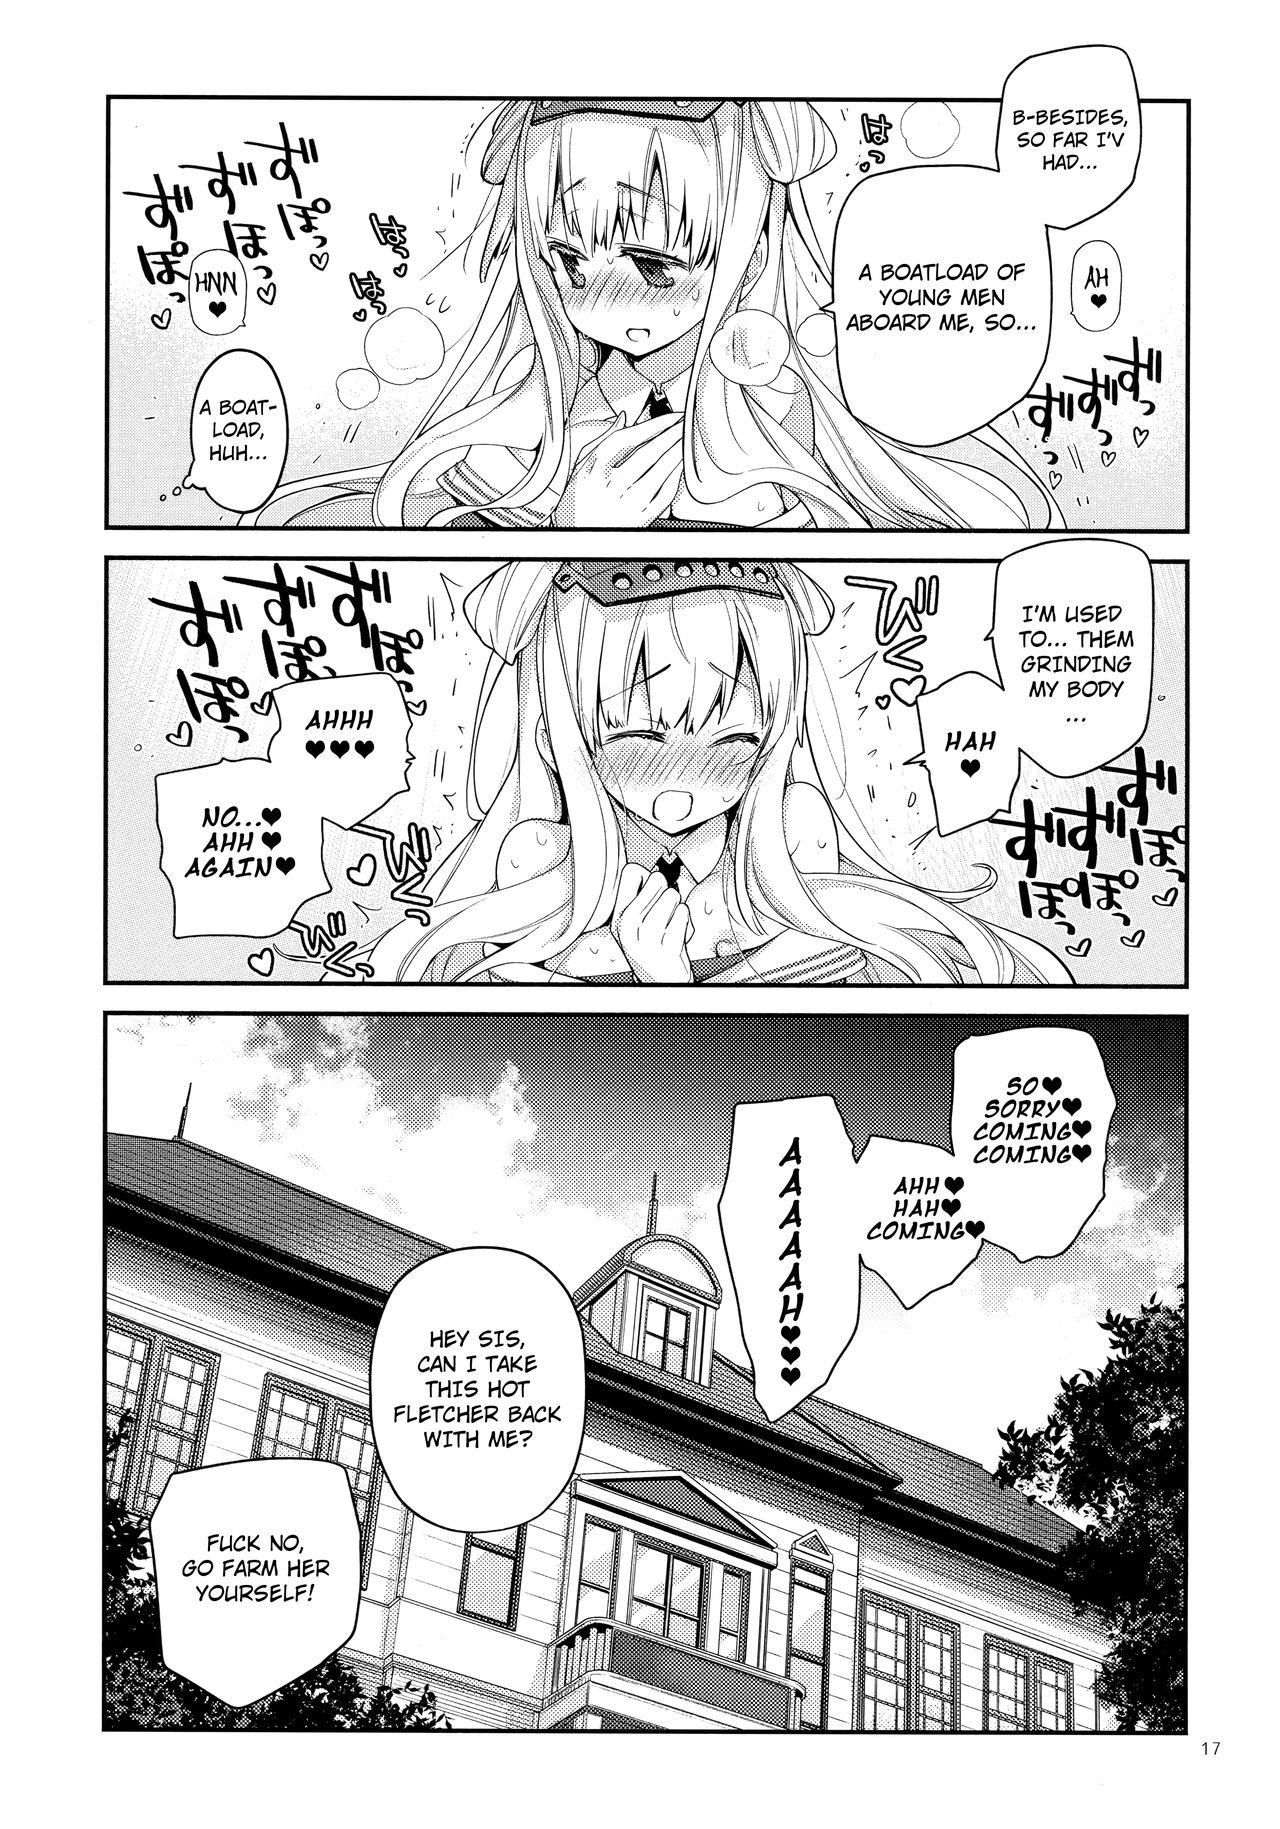 Transexual UltraMarine! - Kantai collection Homemade - Page 17